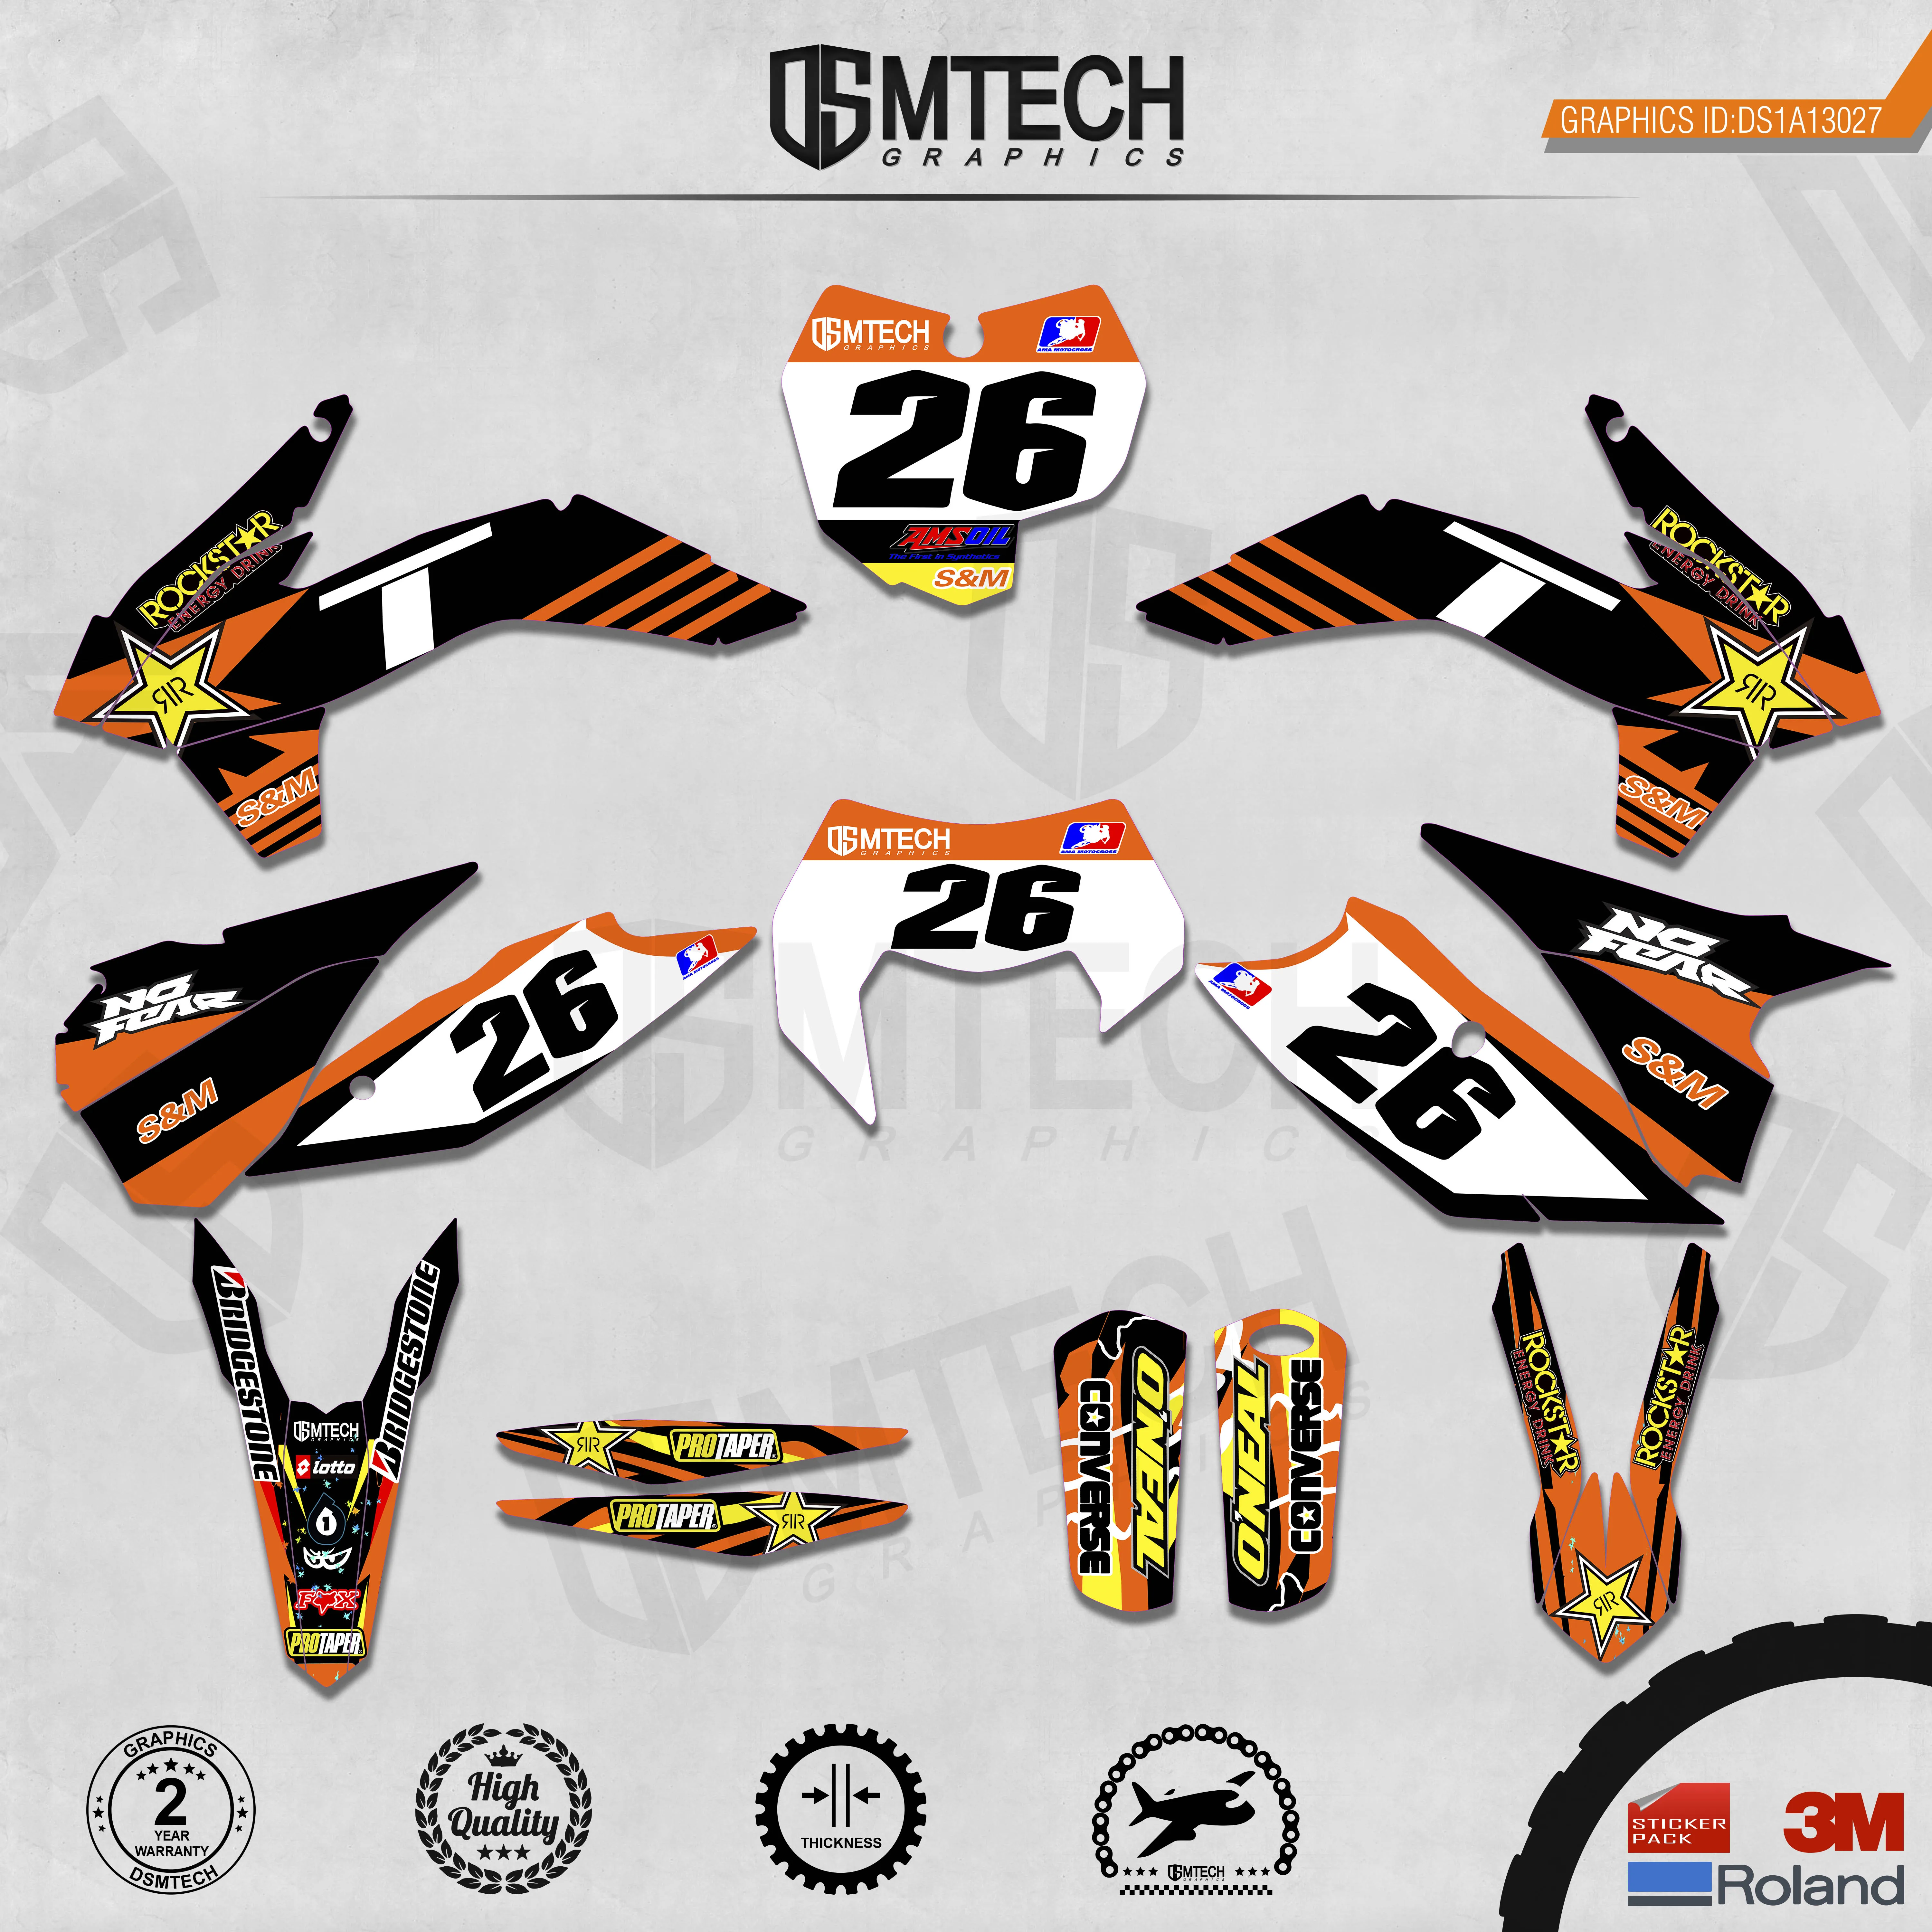 DSMTECH Customized Team Graphics Backgrounds Decals 3M Custom Stickers For 2013-2014 SXF 2015 SXF 2014-2015 EXC 2016 EXC  027